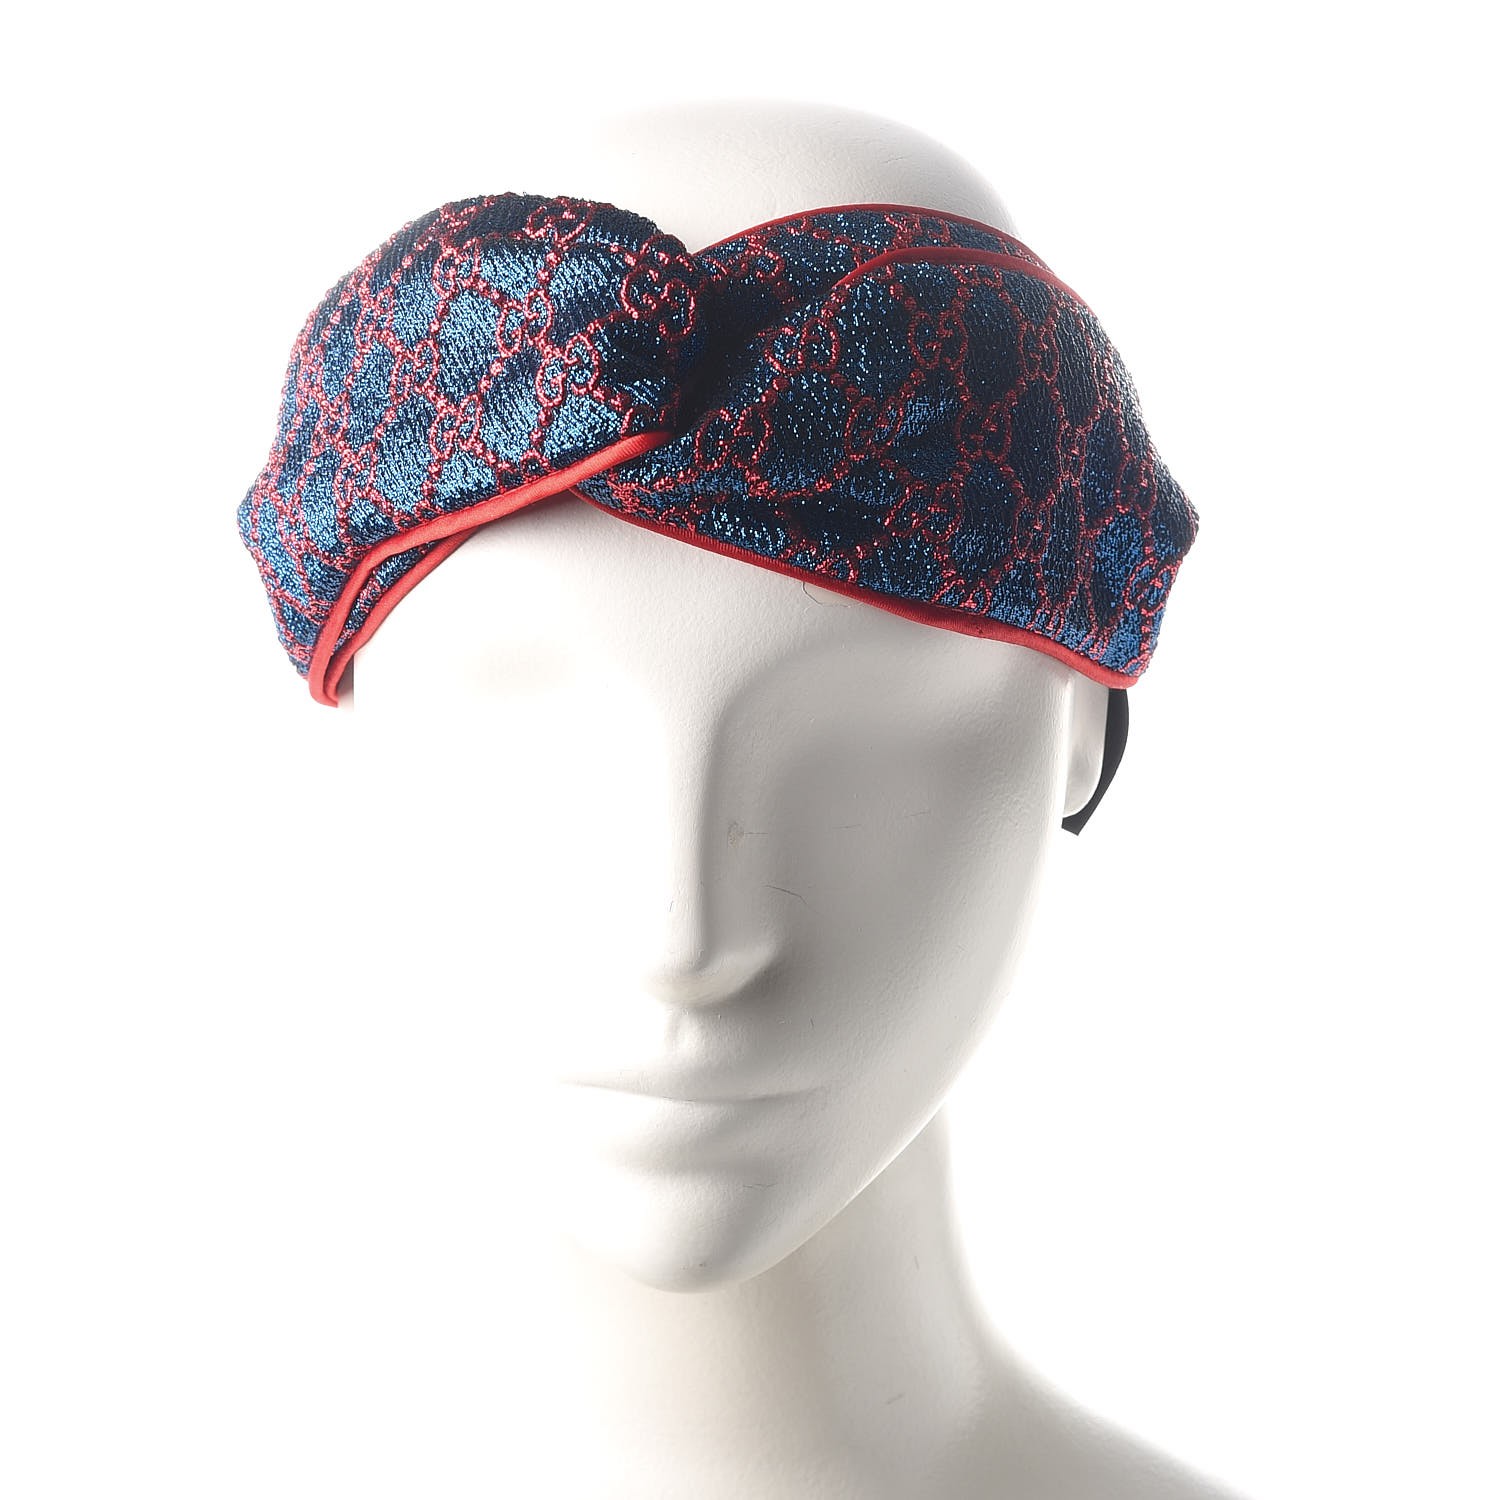 blue and red gucci headband